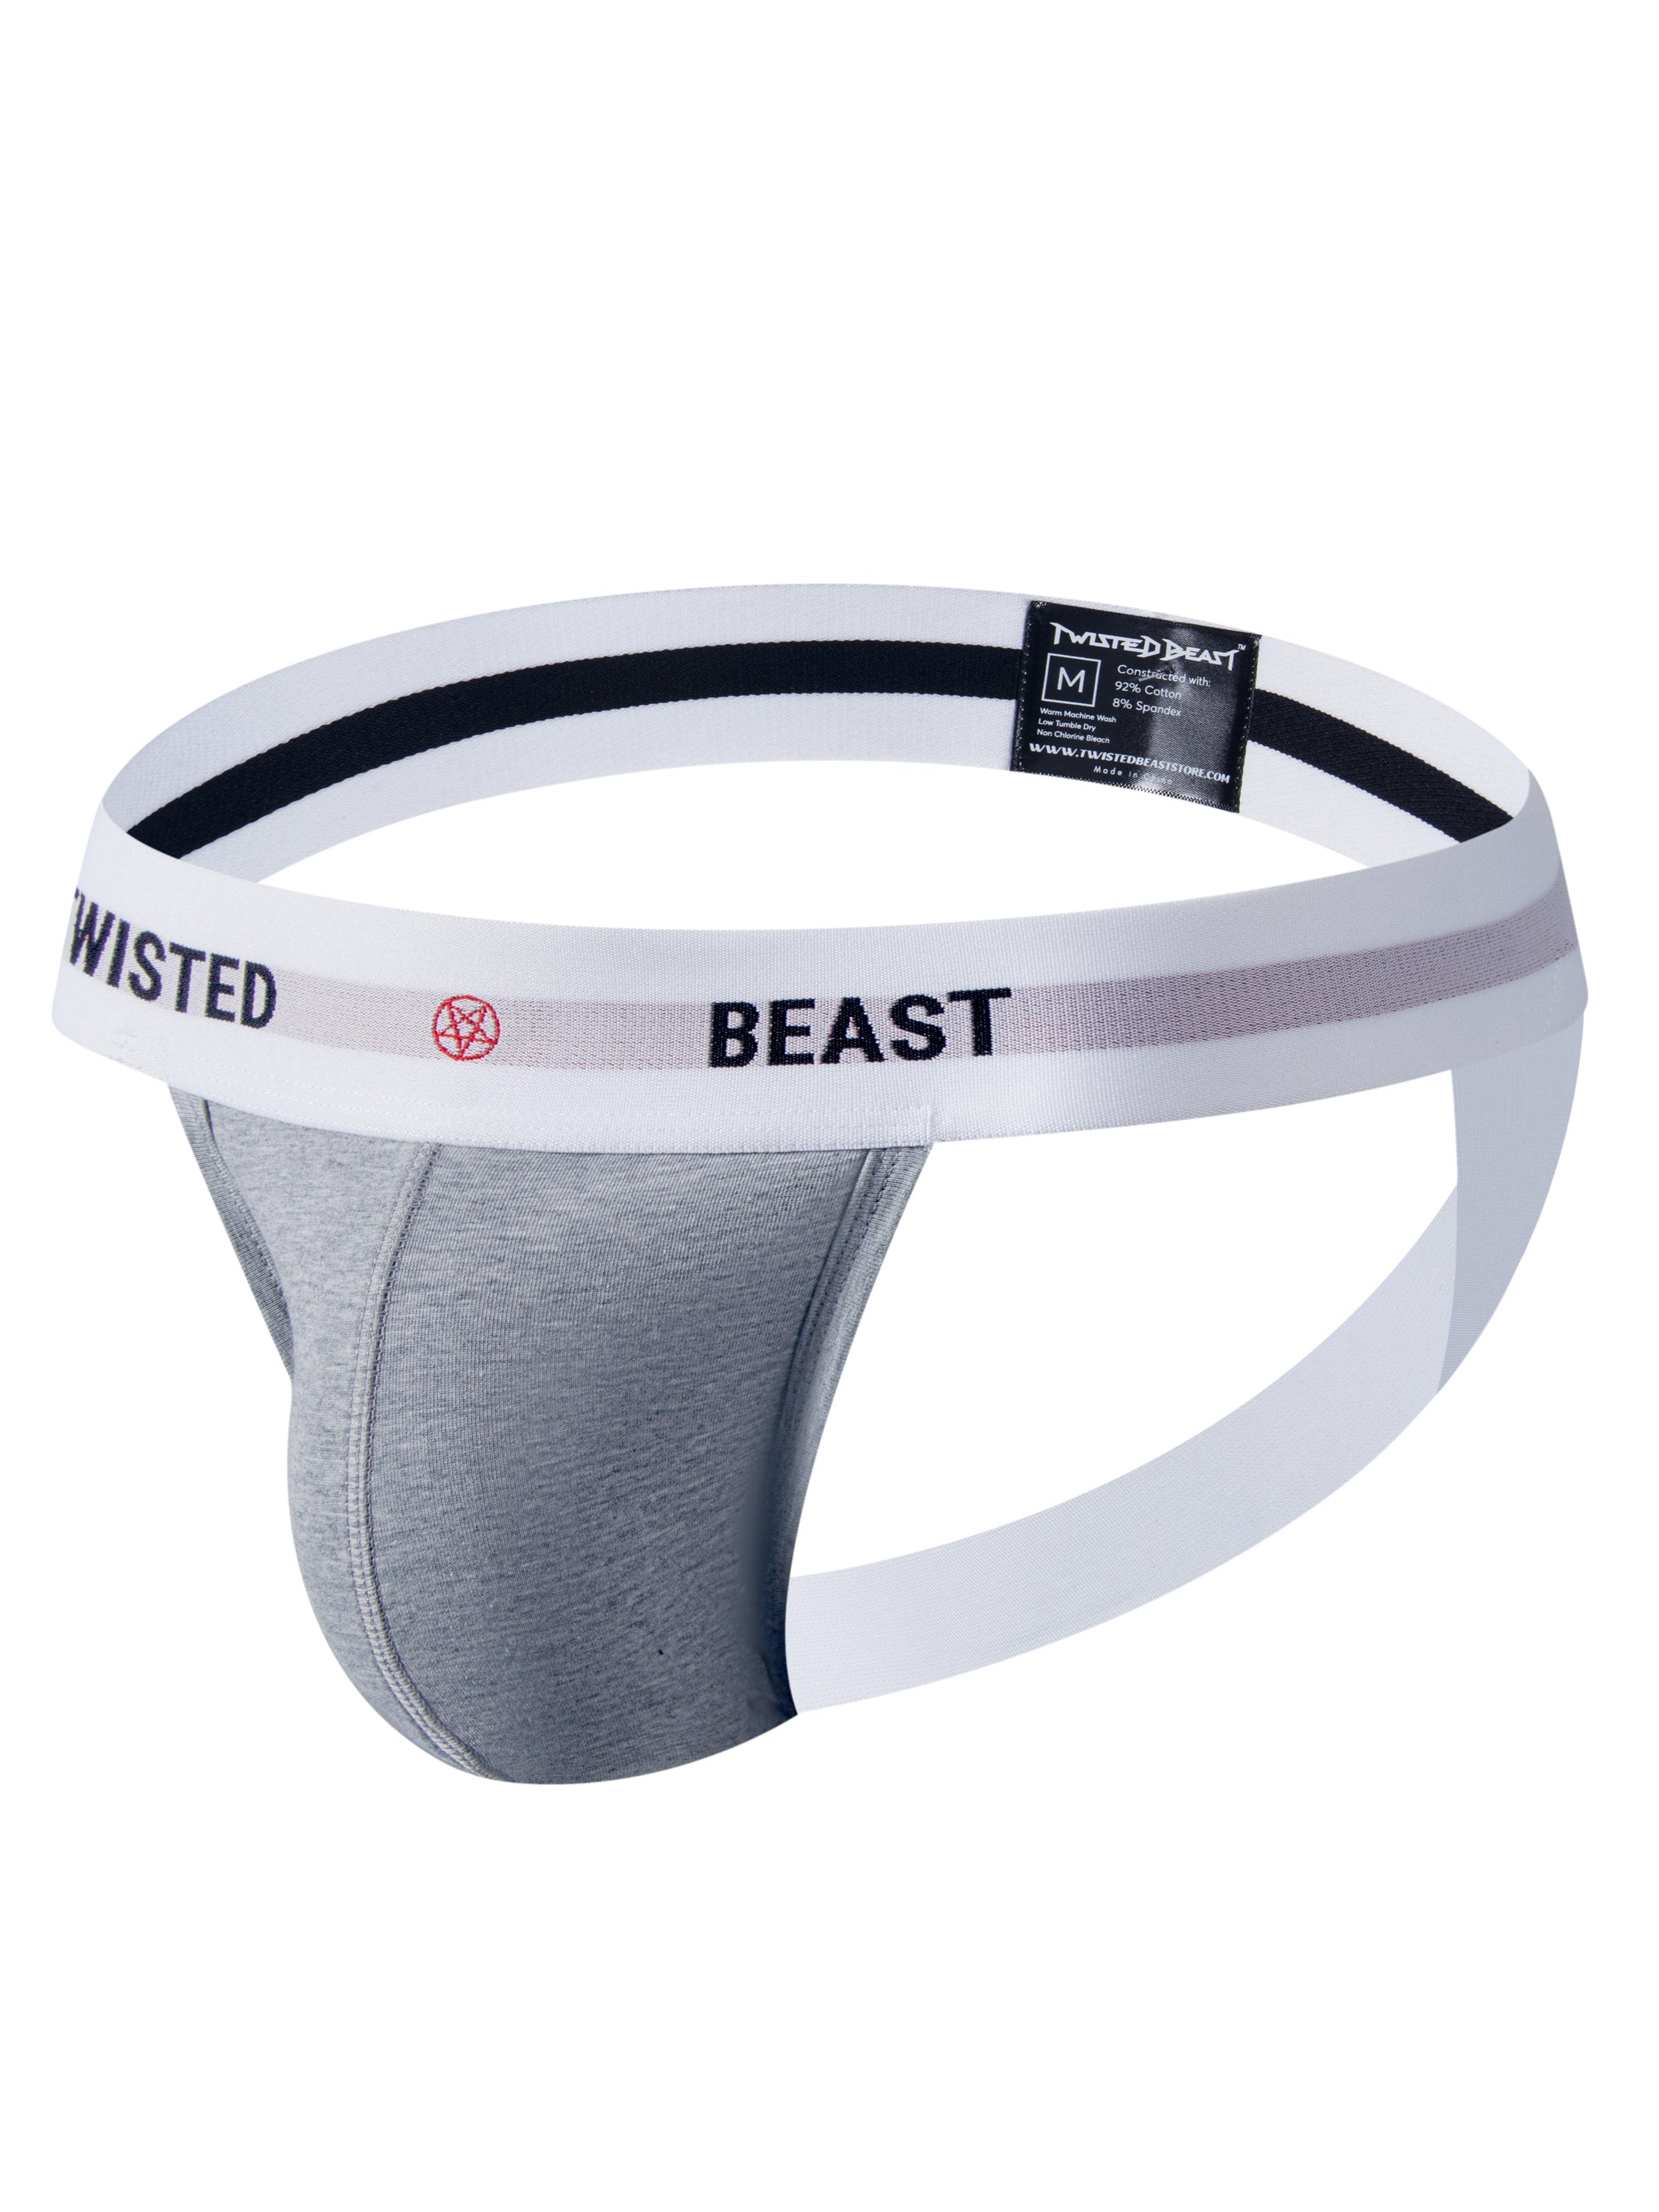 A product photo showing the side of the Insignia Jock in grey.